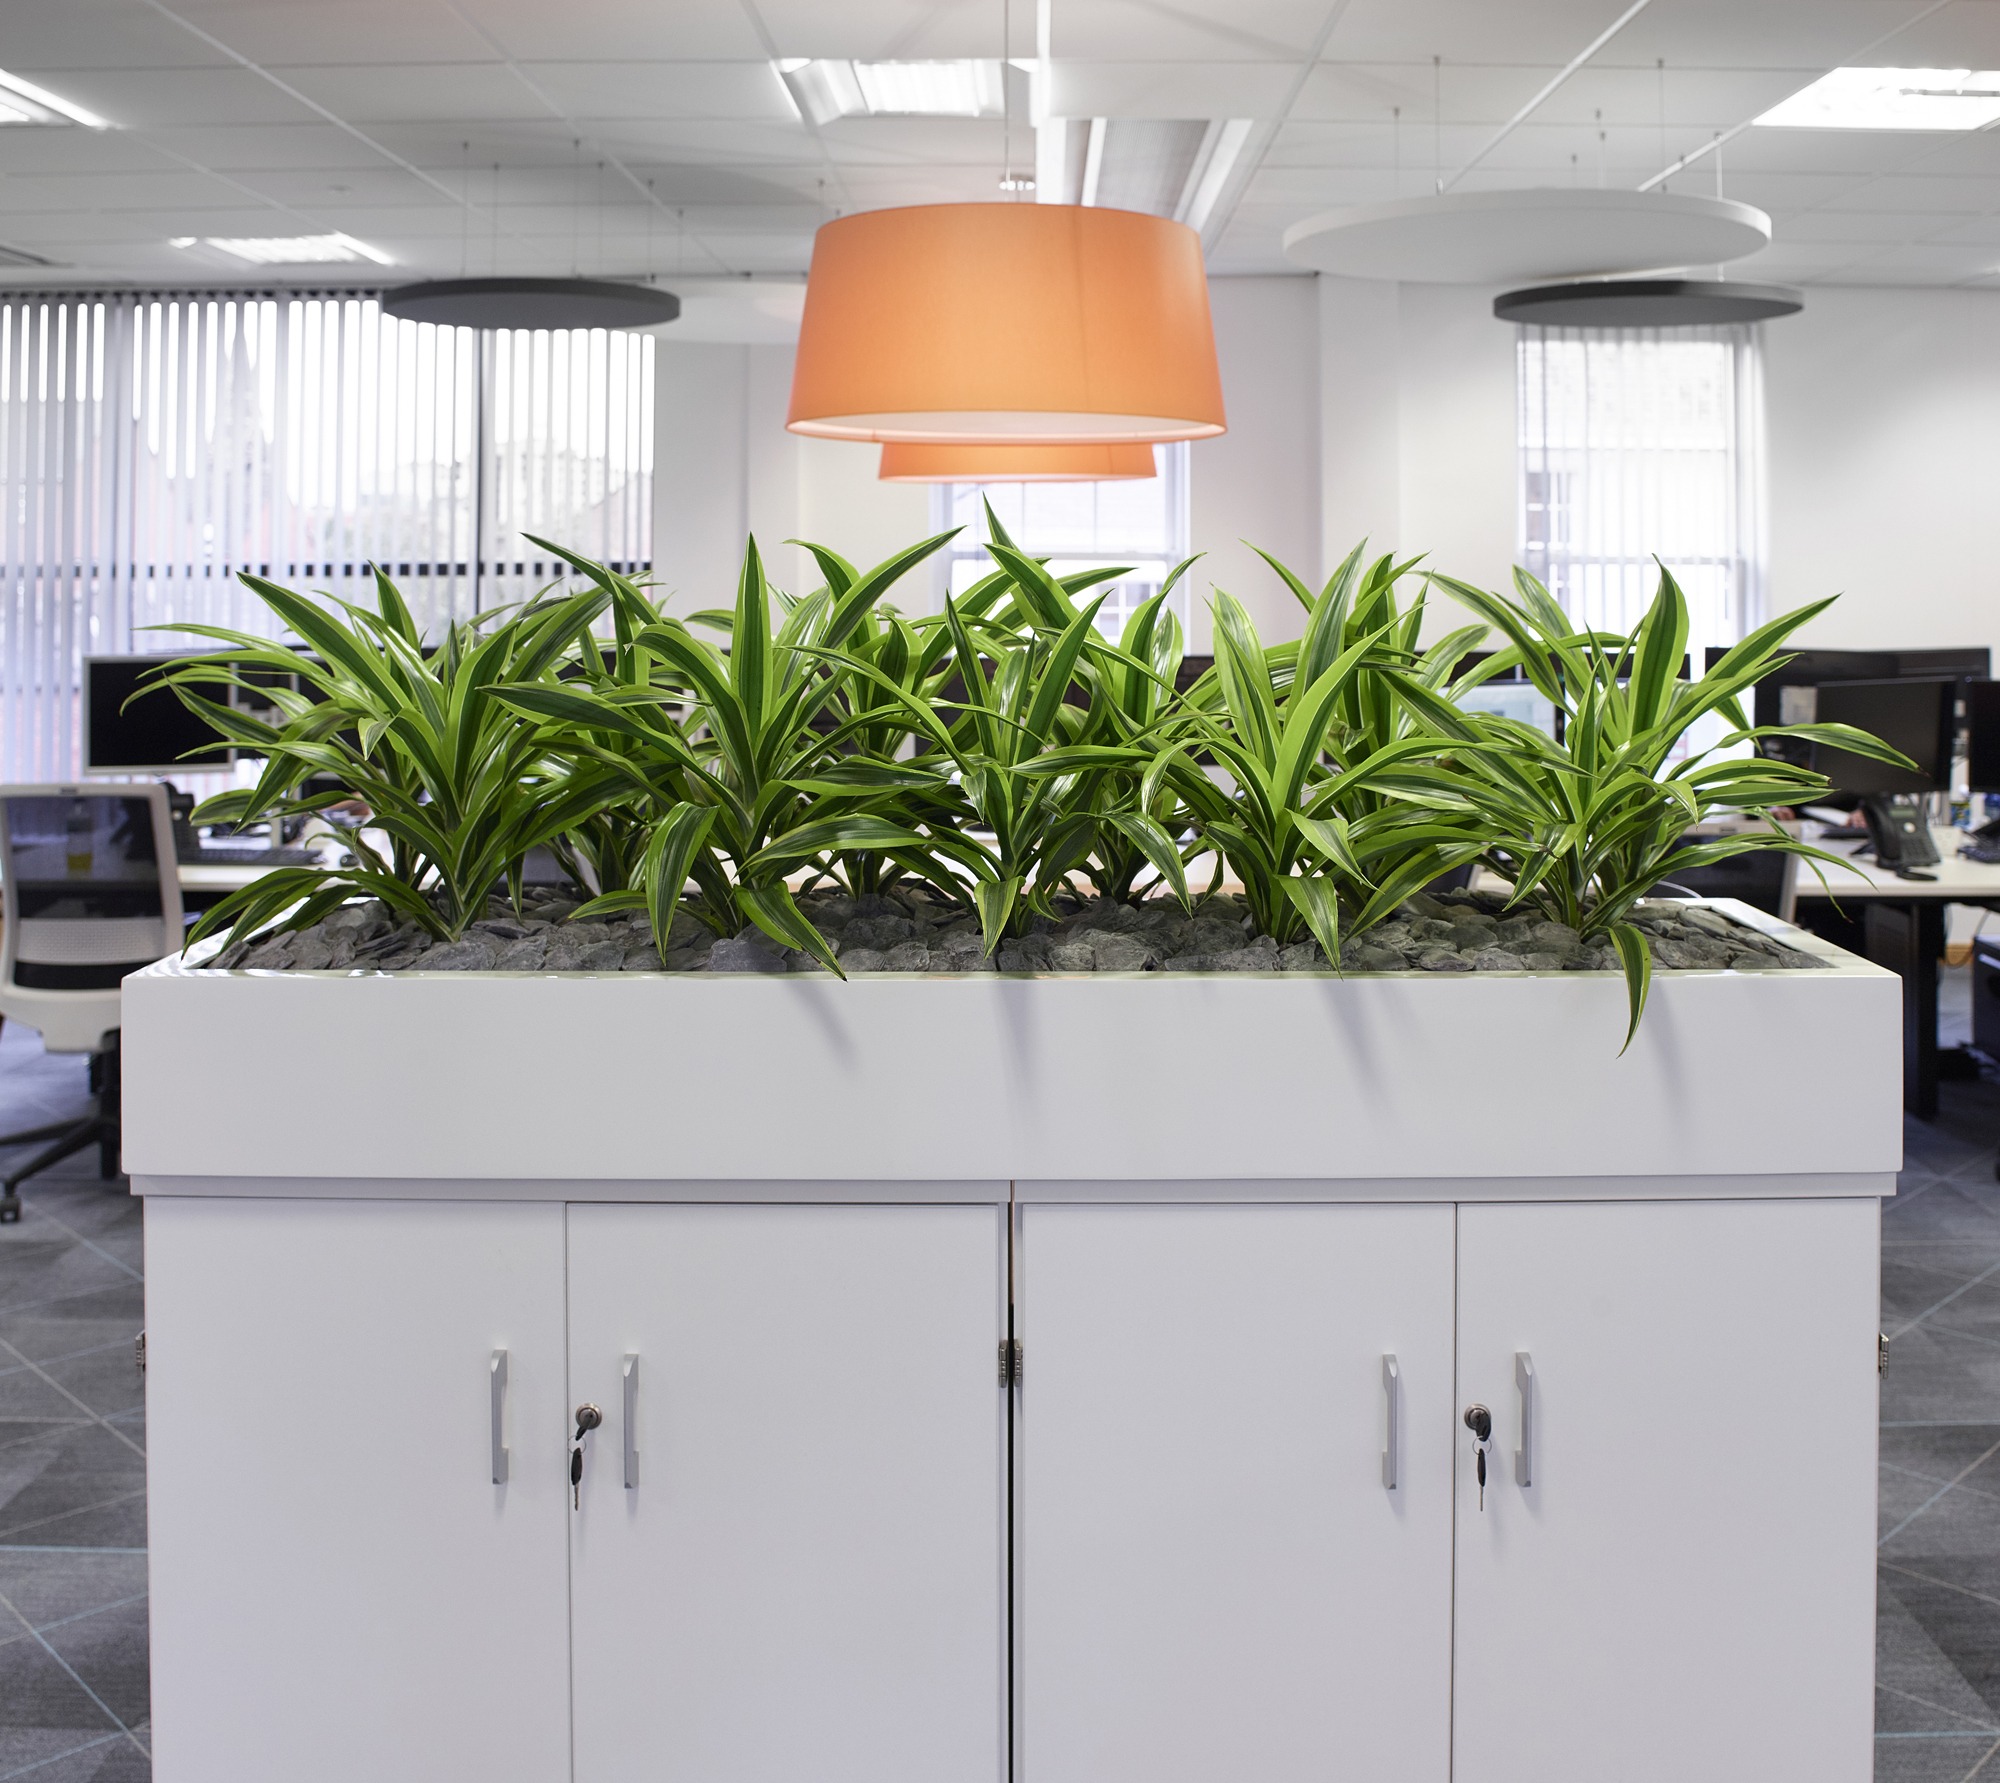 5 Reasons Office Plants Boost Wellbeing: G is for Greenery